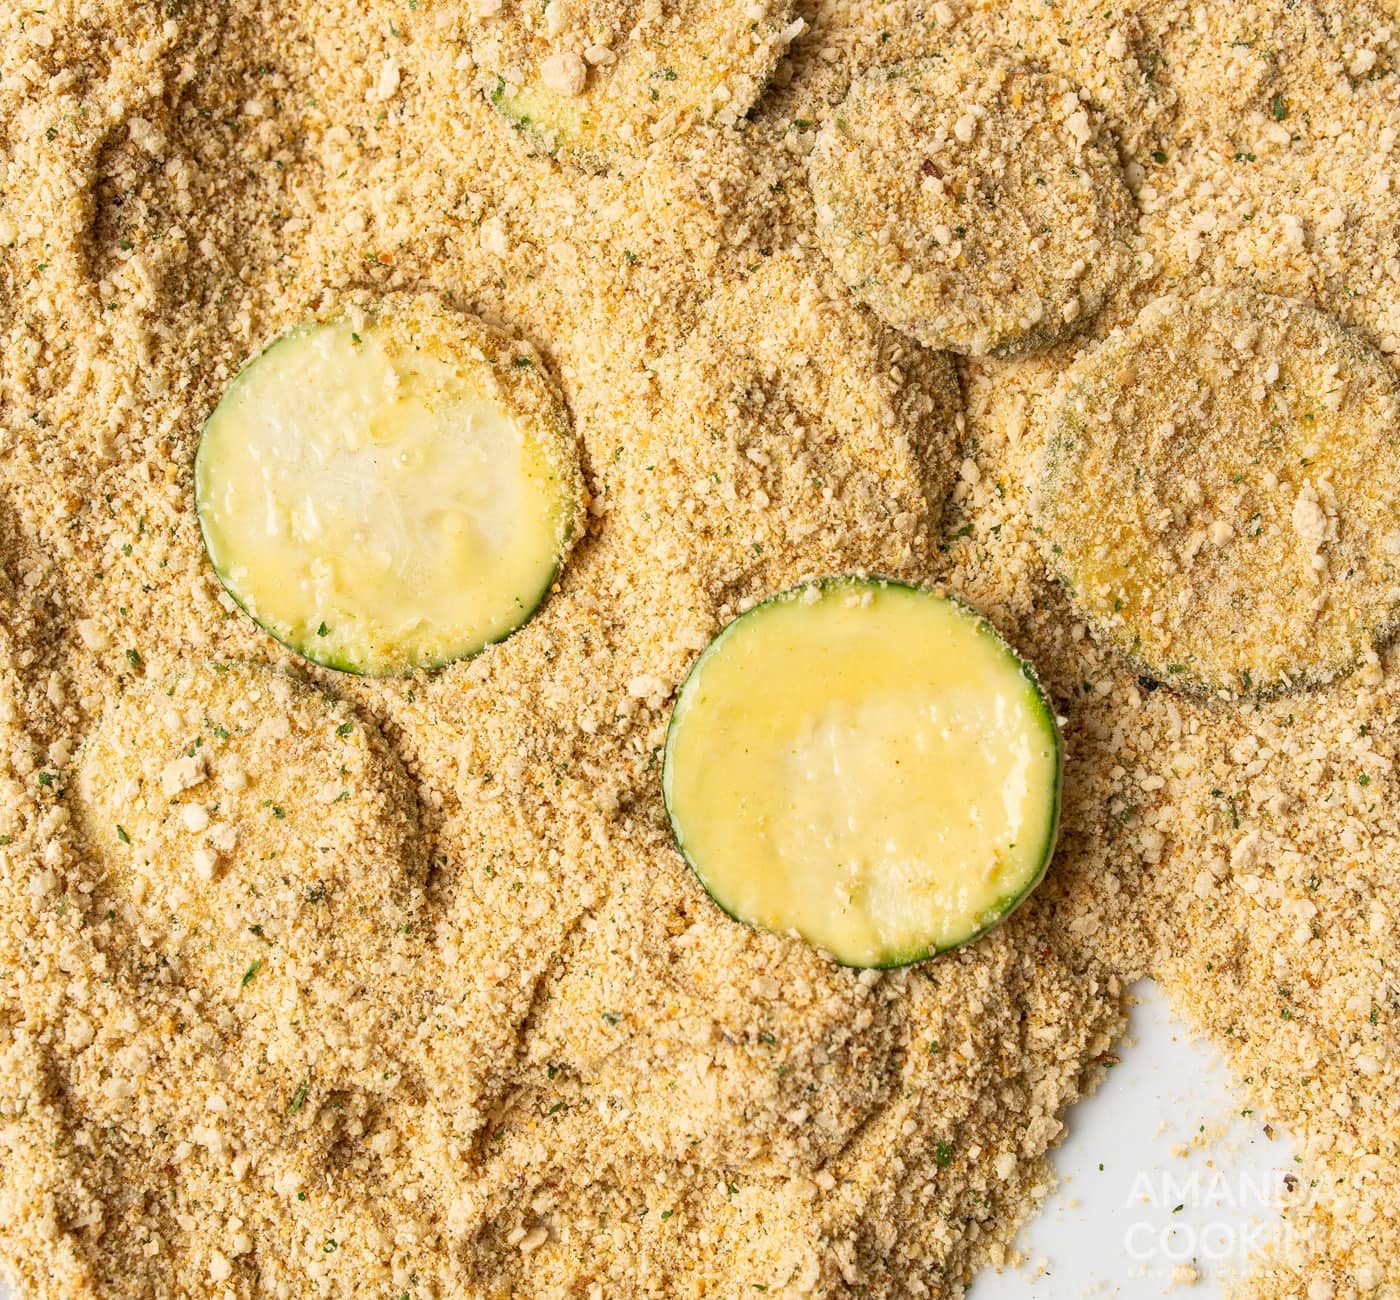 dipping zucchini slices in breadcrumbs and parmesan cheese mixture